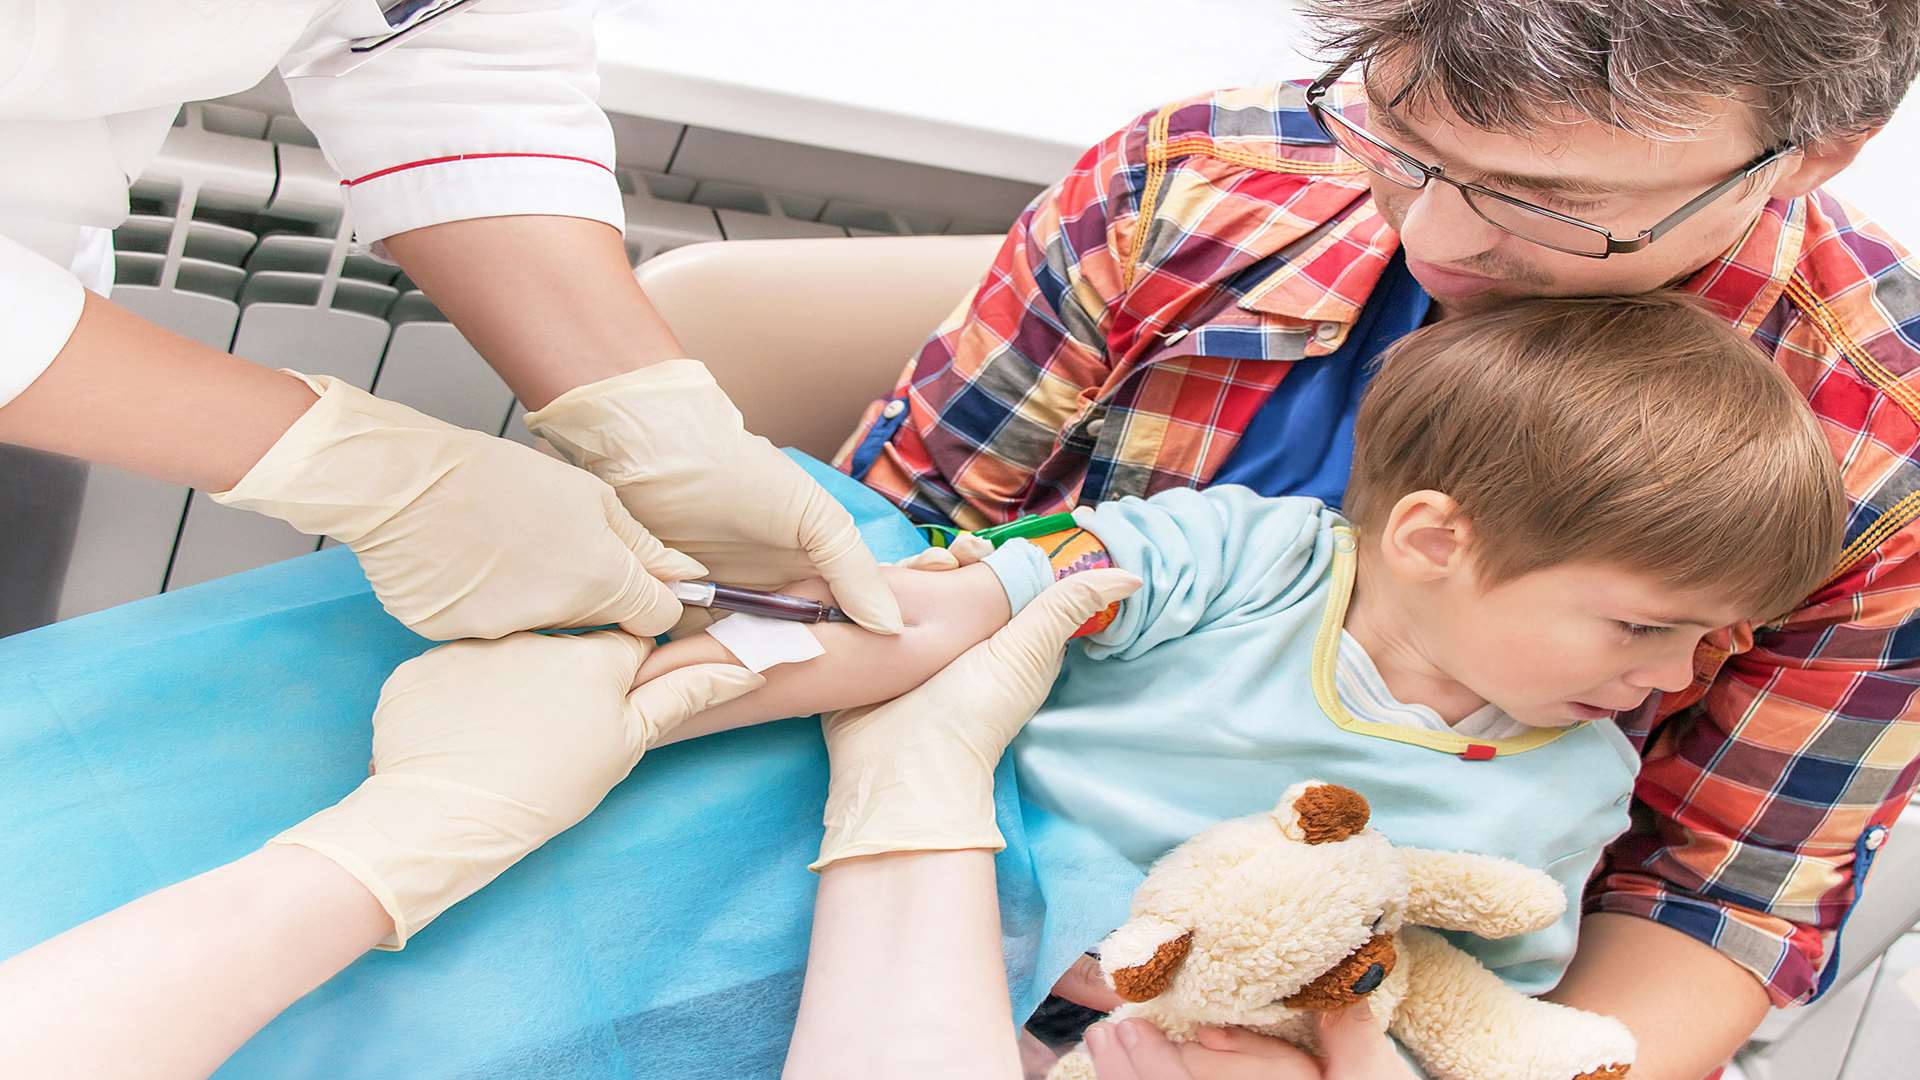 Only 31% of parents were confident about how to help their child during a medical emergency